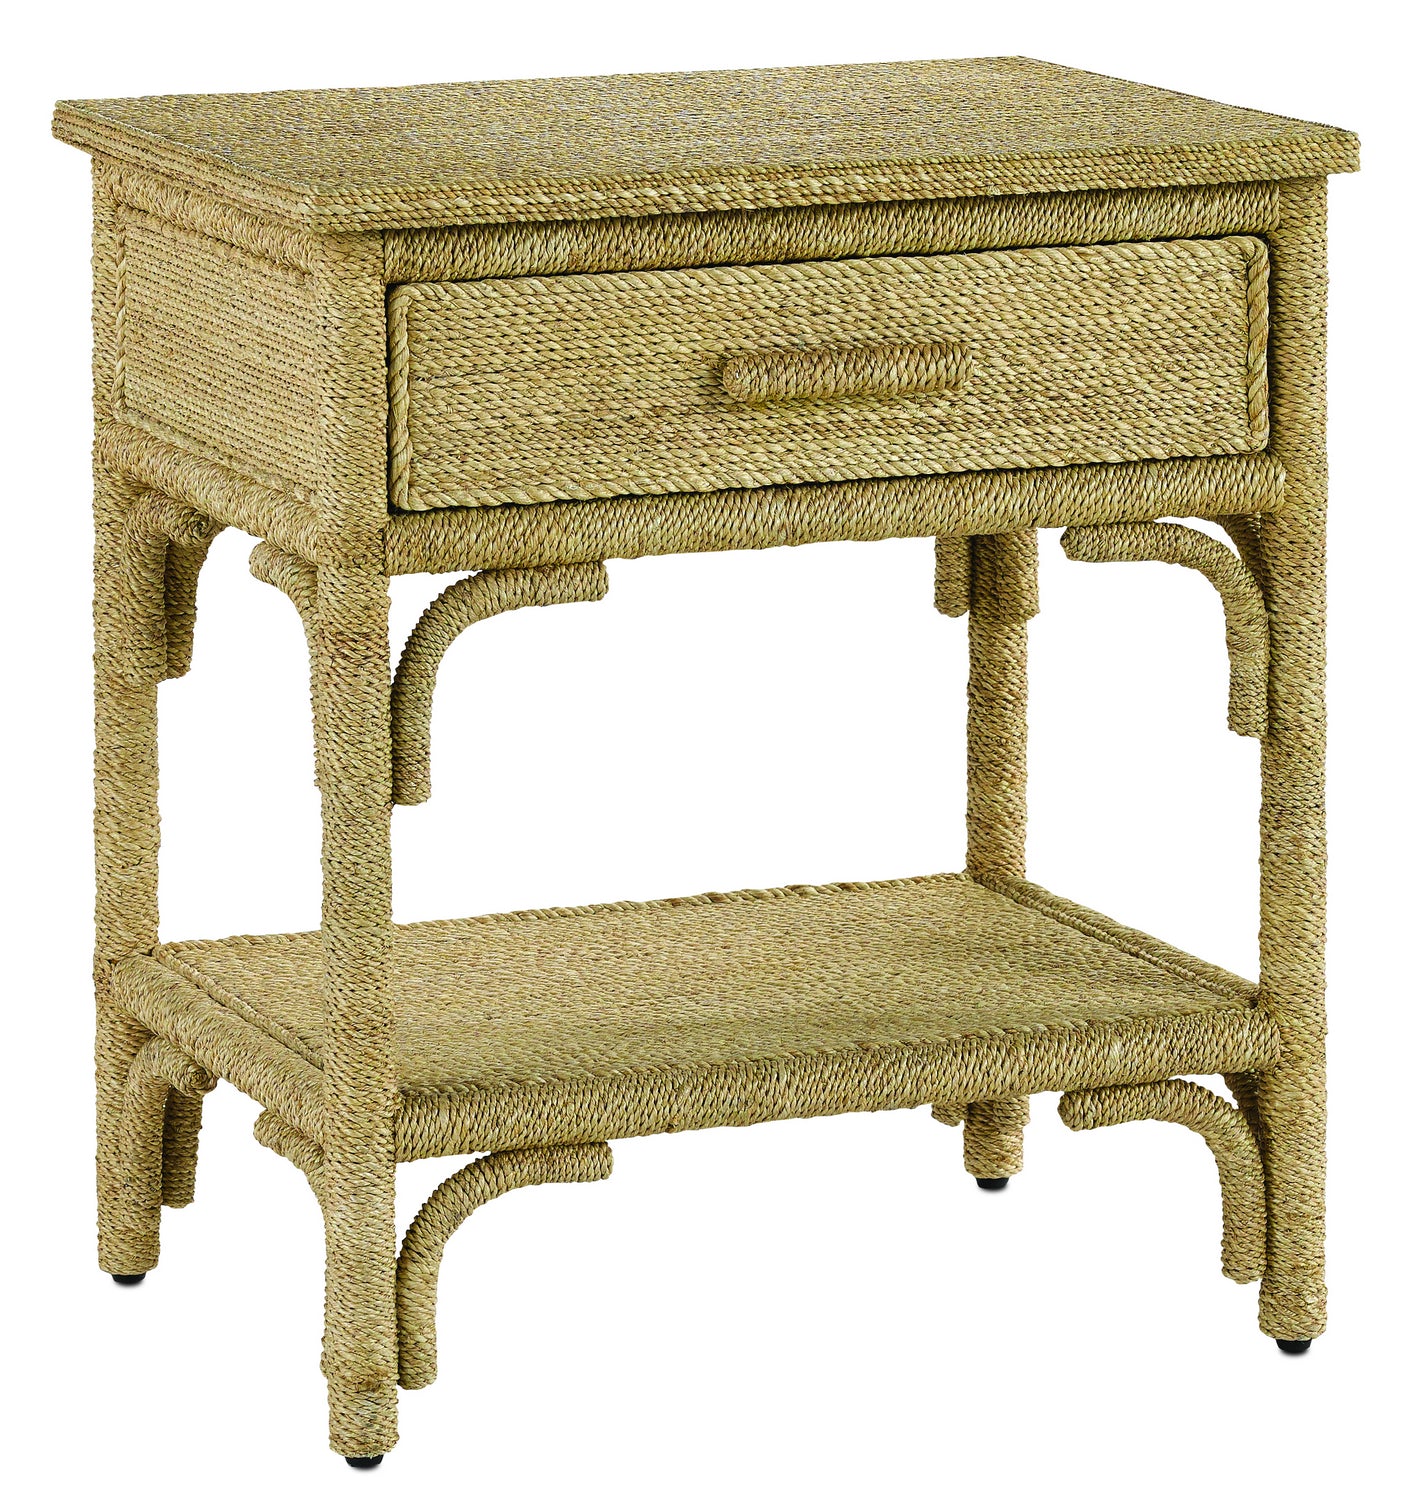 Nightstand from the Olisa collection in Natural/Washed Wood finish